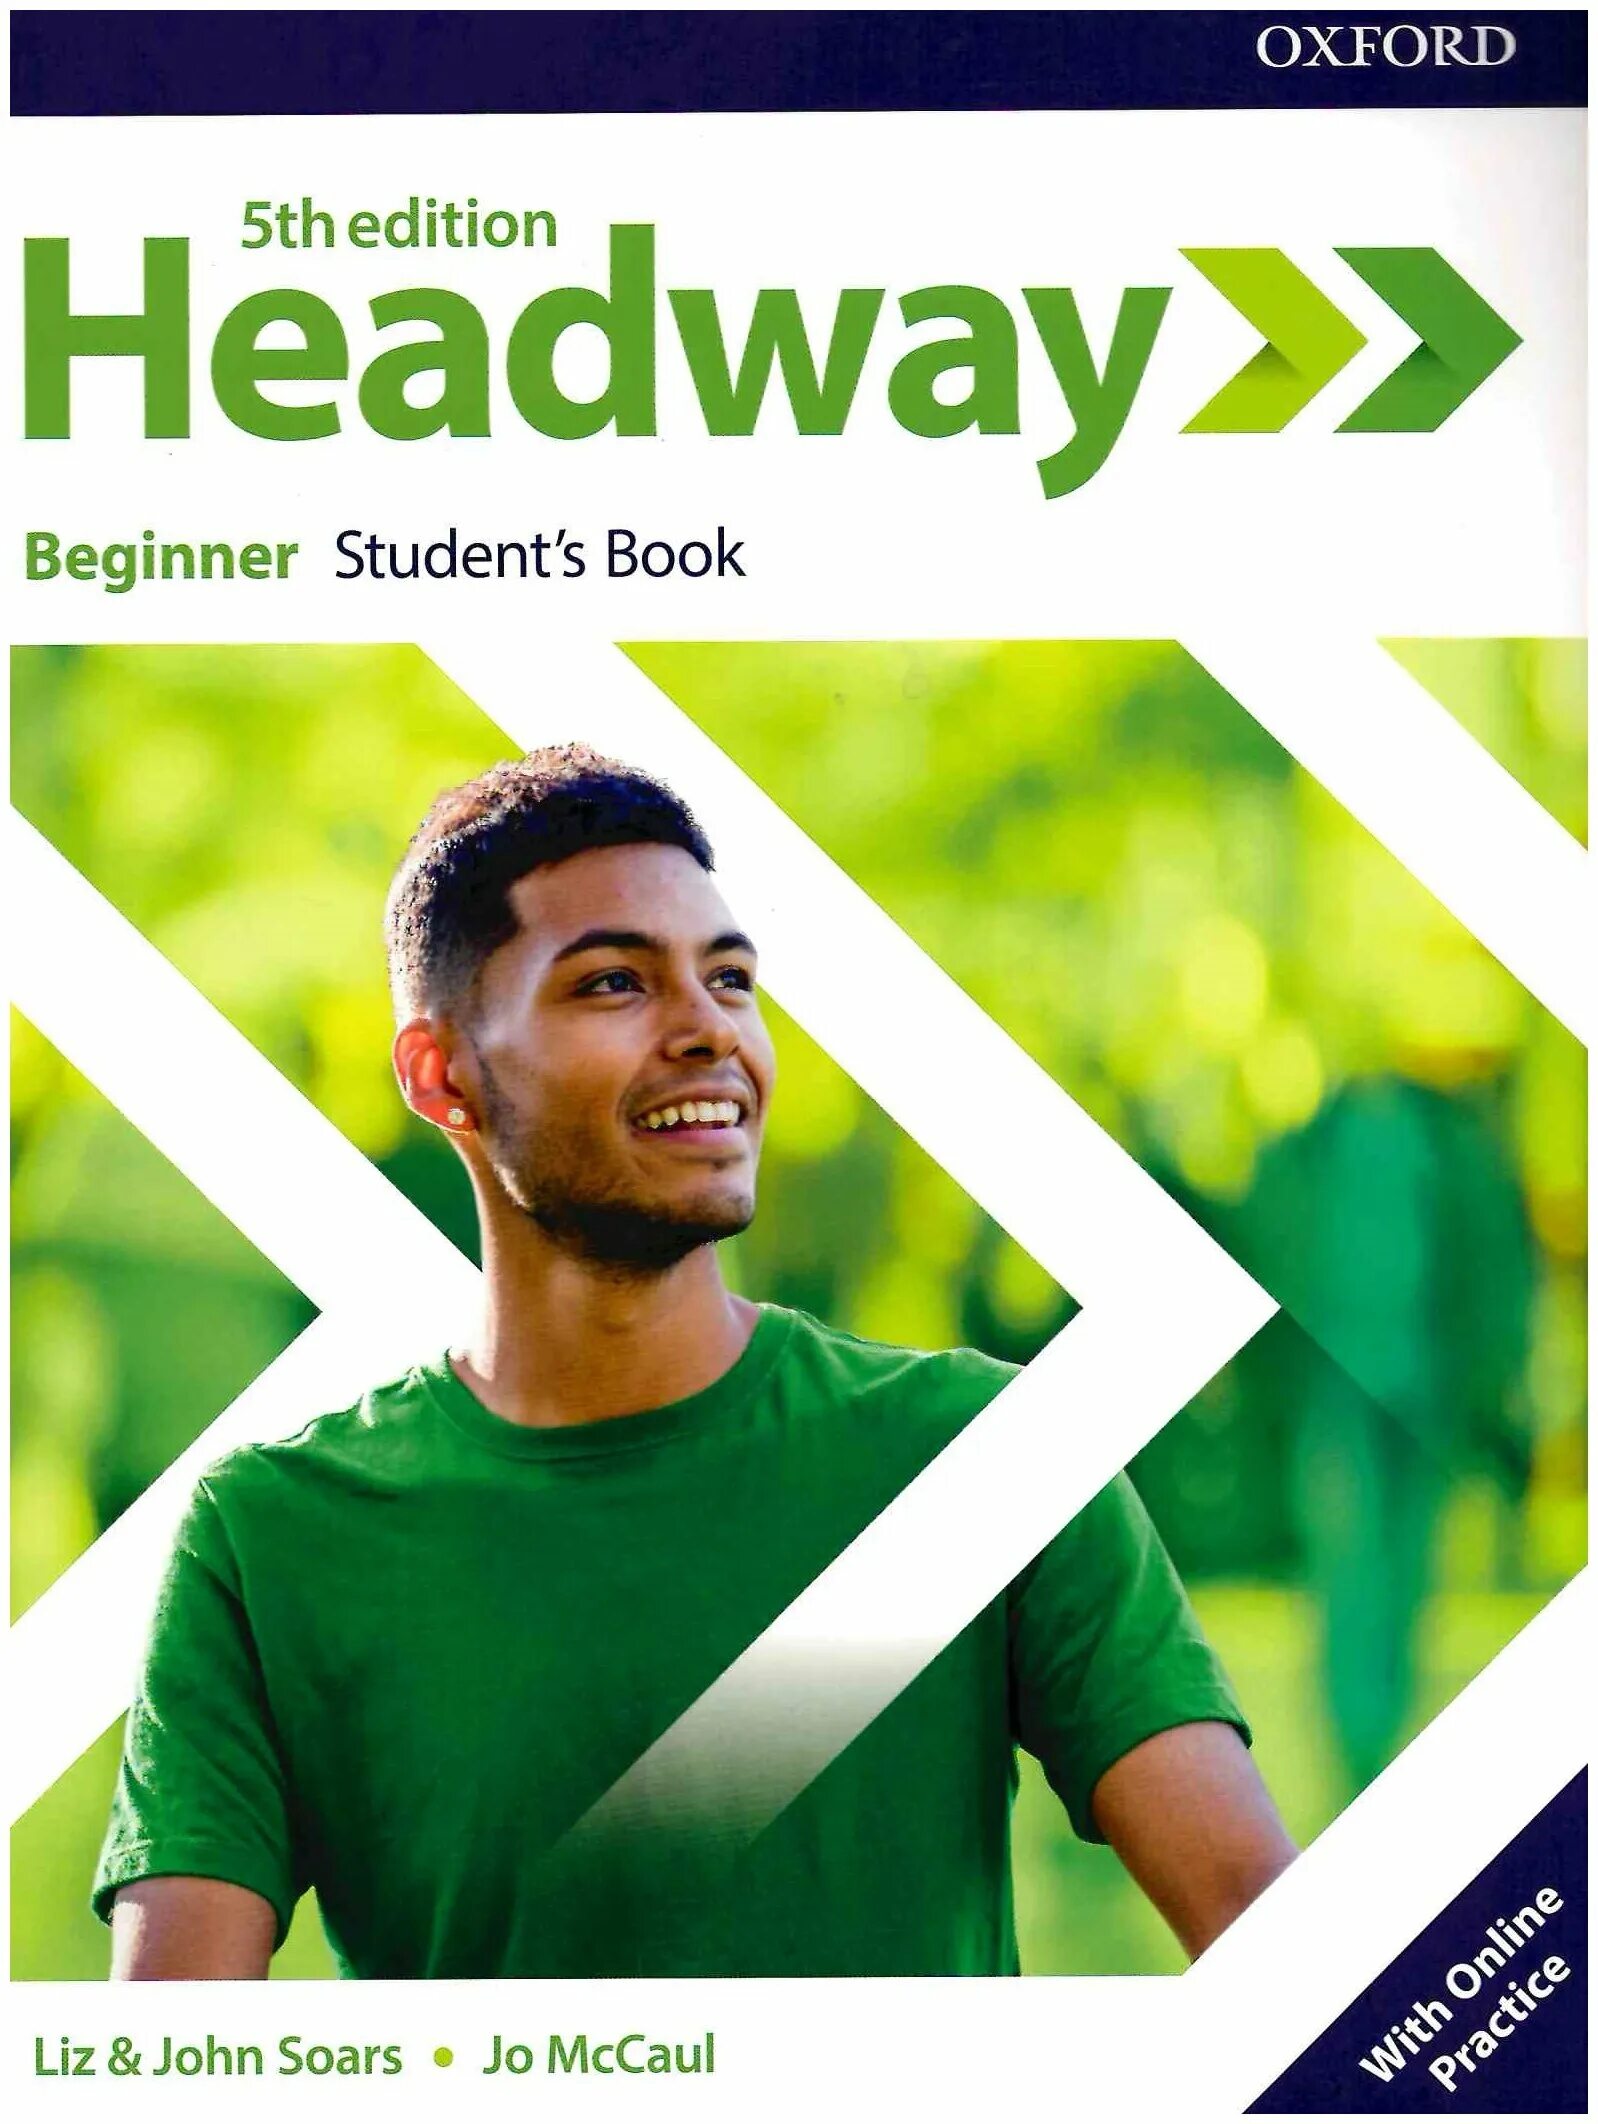 New headway 5th edition. Headway Beginner 5th Edition book Cover. New Headway Beginner student's book 5th Edition. New Headway Beginner 5 th students book. New Headway Beginner 5th Edition.